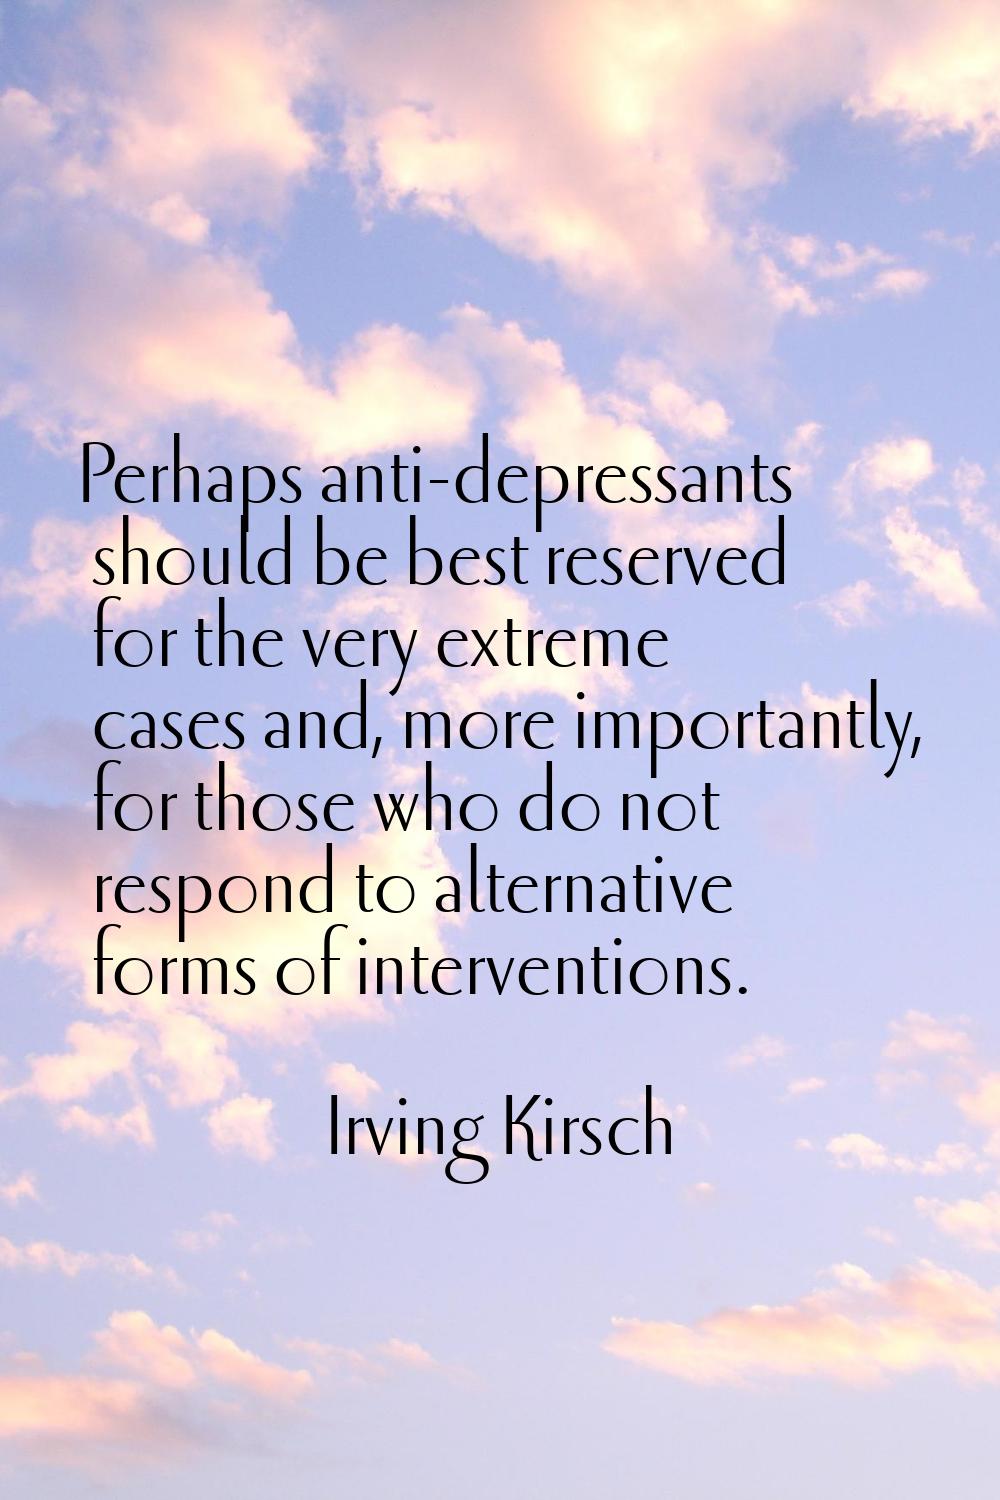 Perhaps anti-depressants should be best reserved for the very extreme cases and, more importantly, 